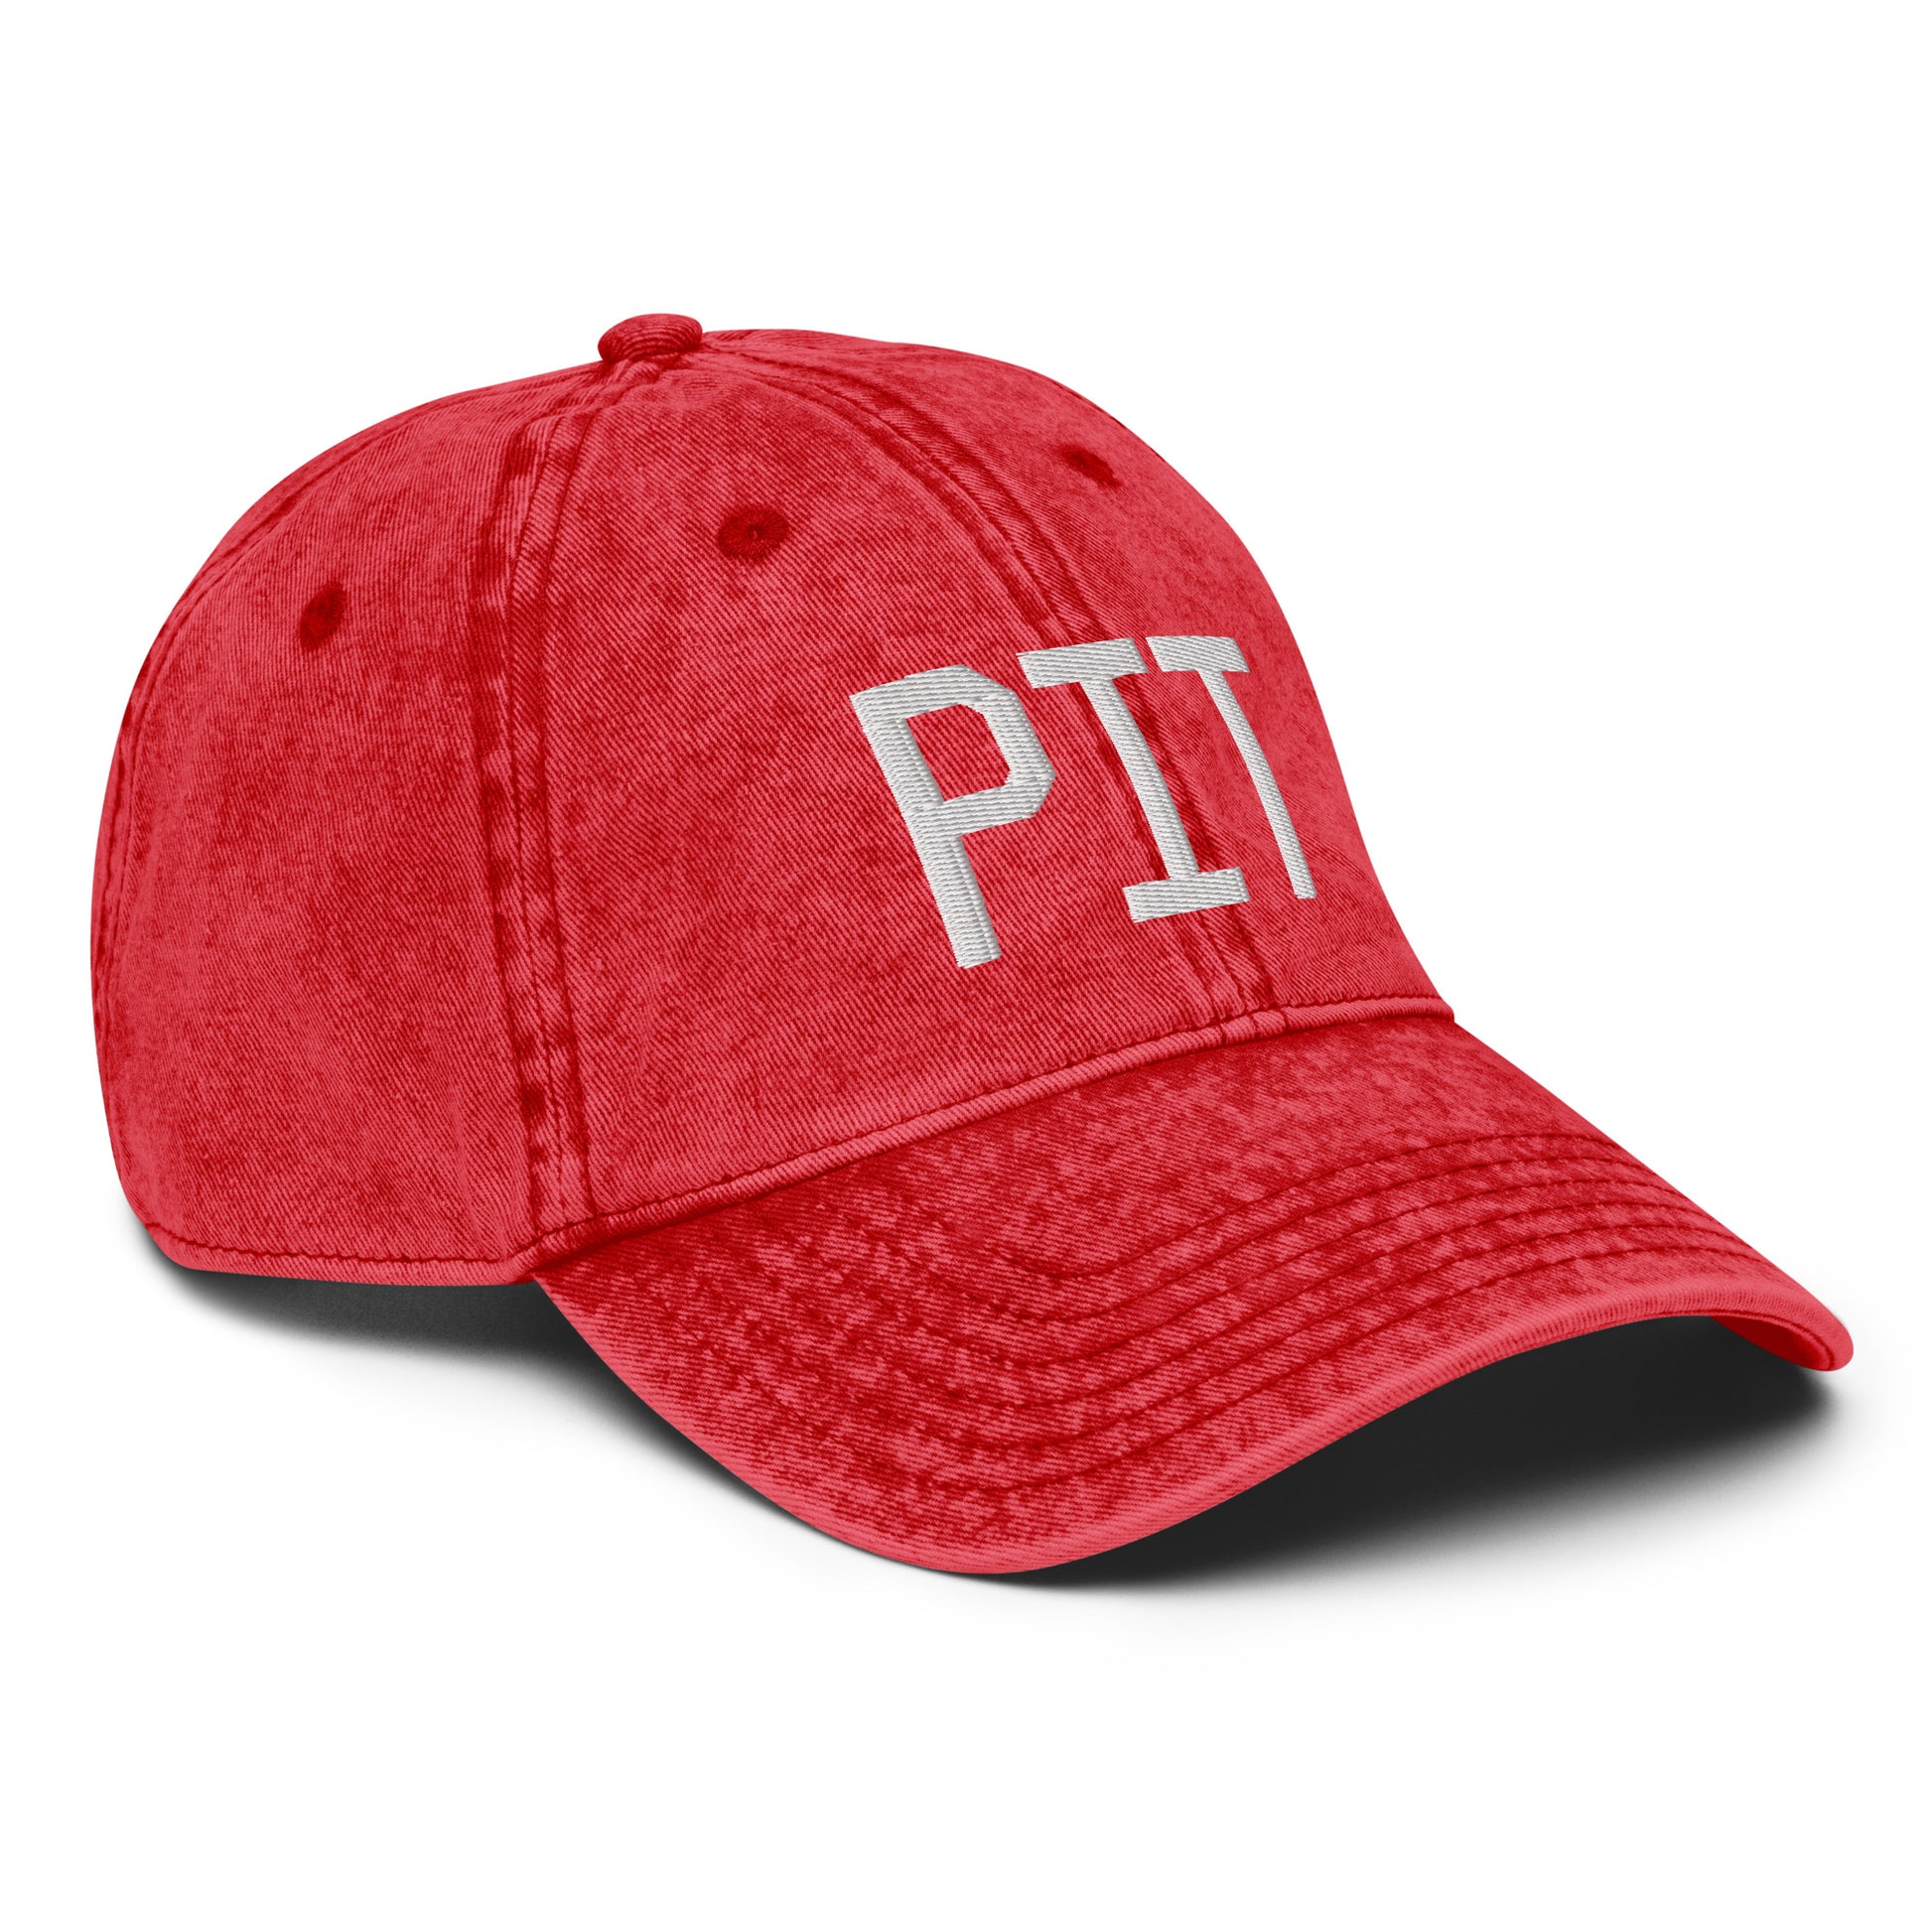 Airport Code Twill Cap - White • PIT Pittsburgh • YHM Designs - Image 24